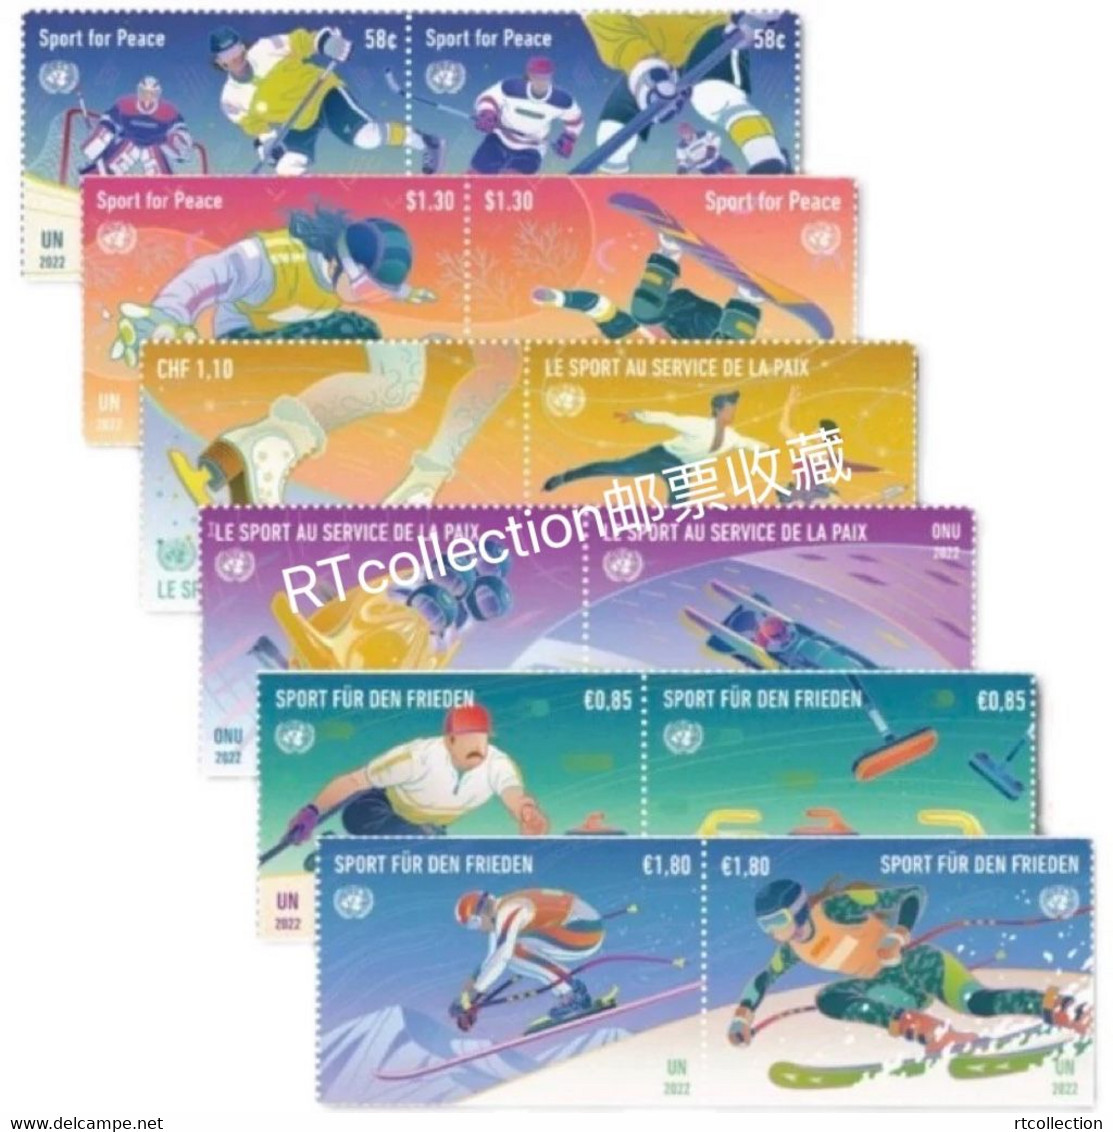 United Nations 2022 UN Geneva New York Vienna - 3 Set Sport For Peace Winter Olympic Games Skiing Ice Skating Stamps MNH - Emissioni Congiunte New York/Ginevra/Vienna